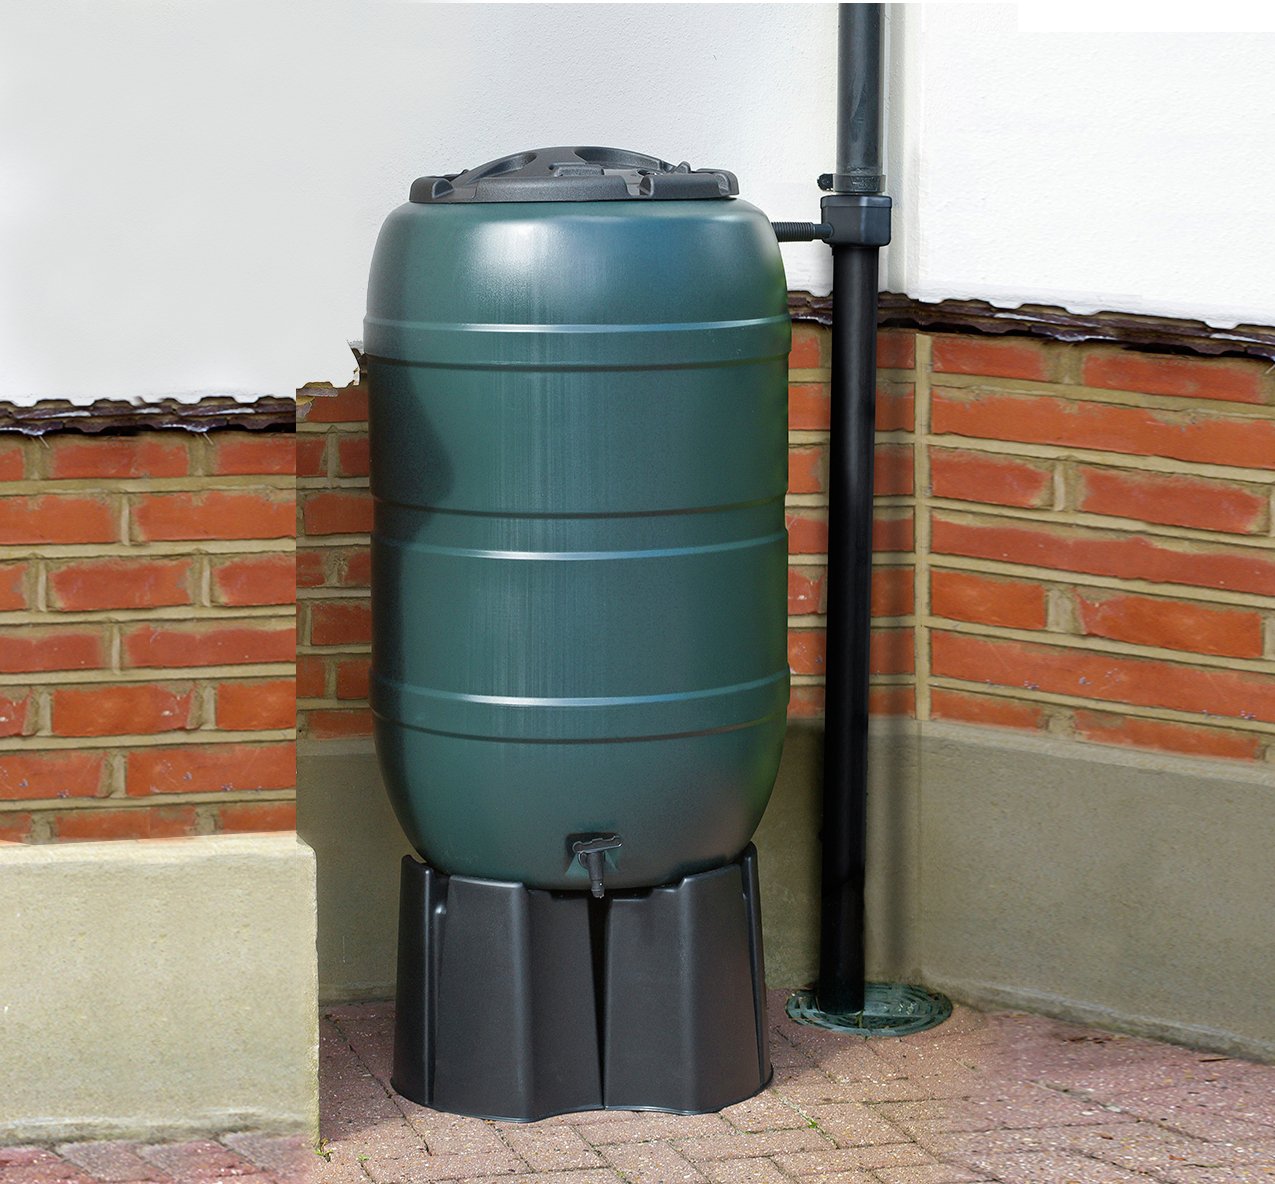 Ward Garden Green Plastic 210 Litre Water Butt Kit C/w Stand Tap Connection Set